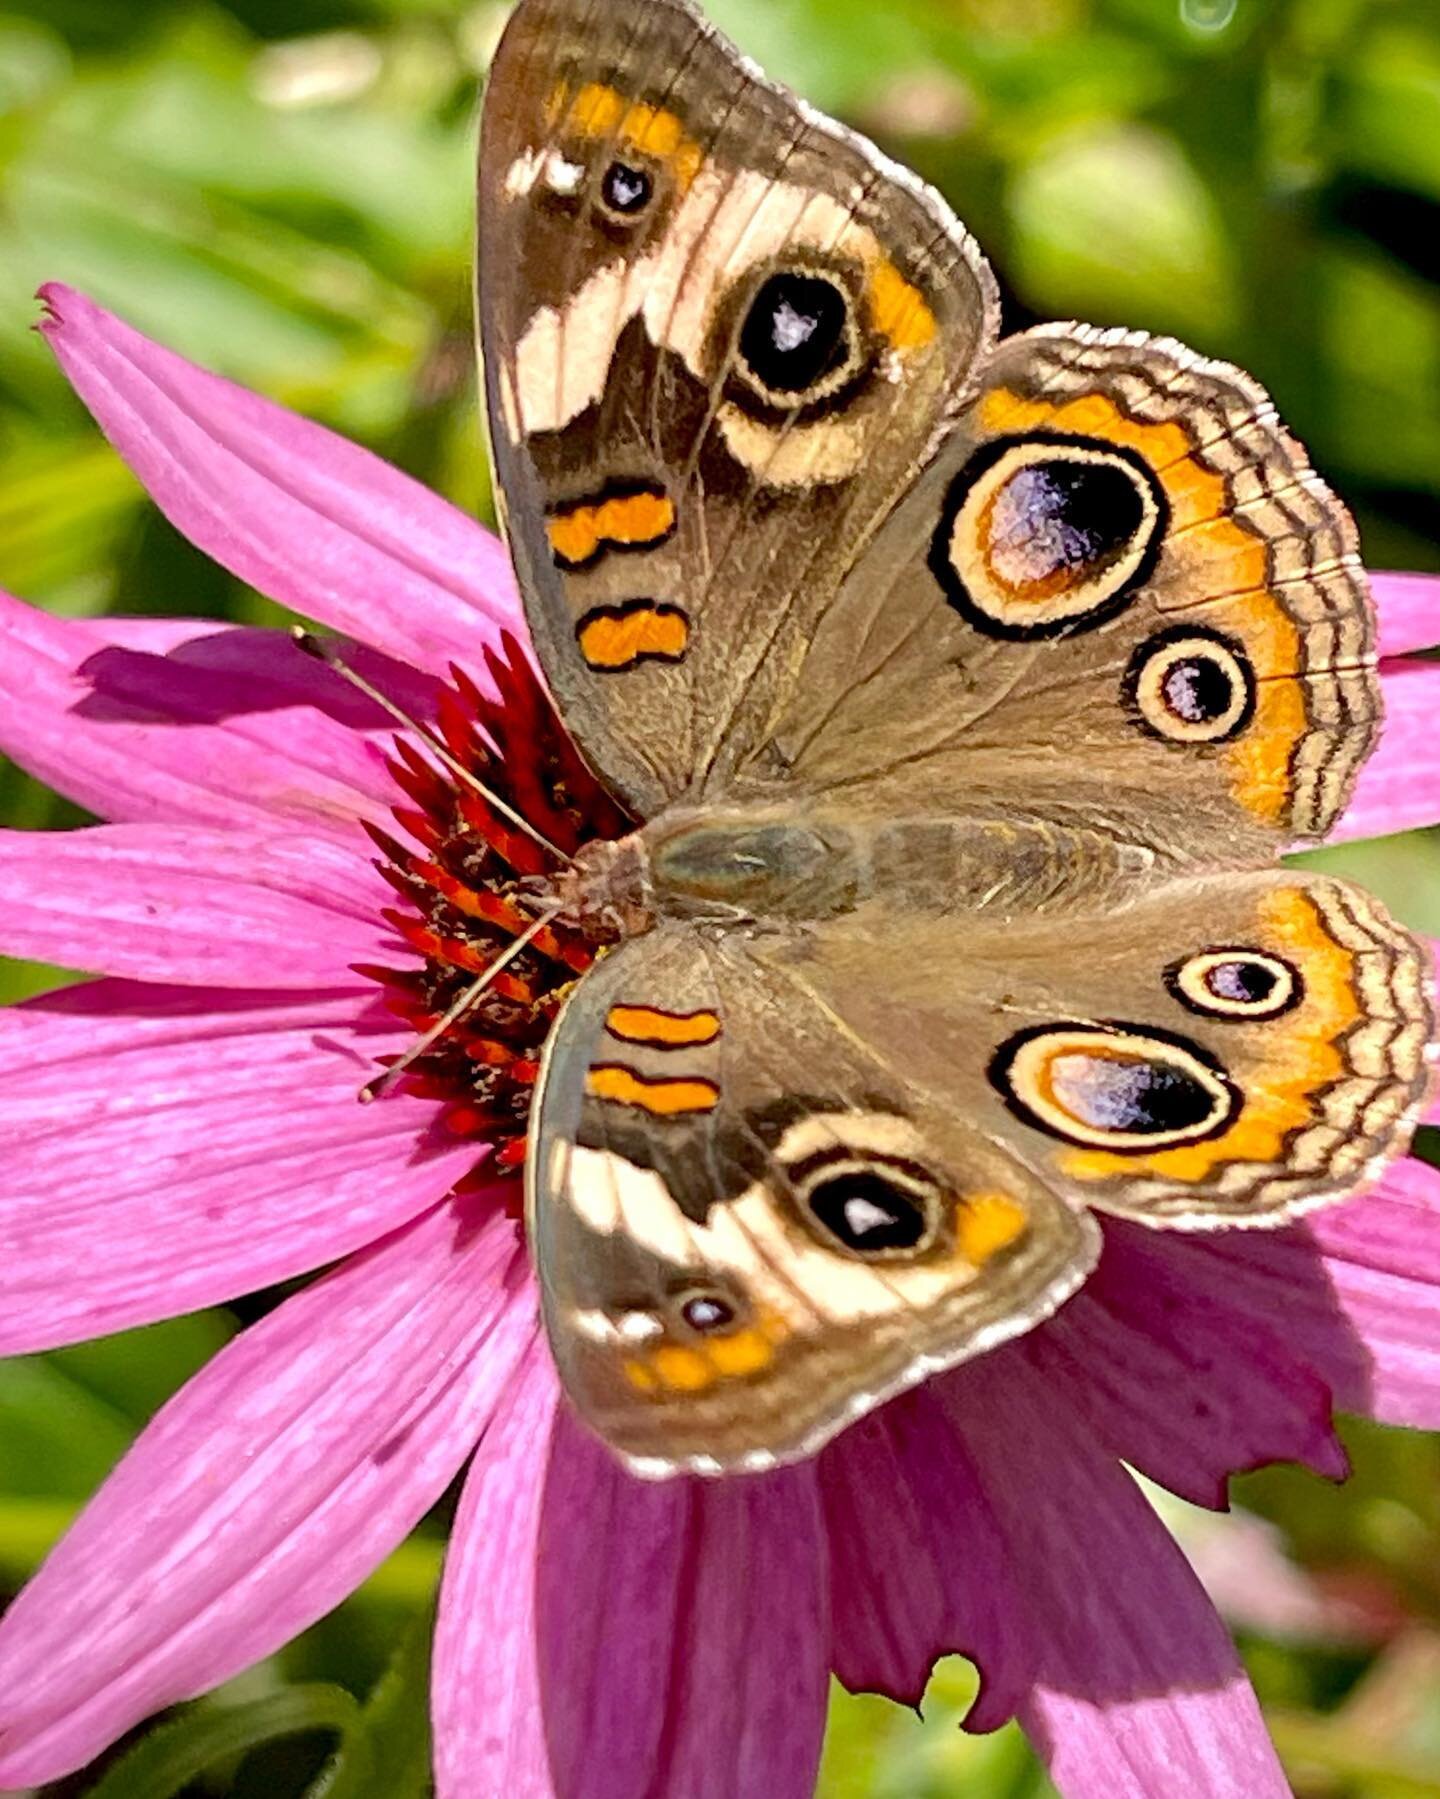 Is there really anything &ldquo;common&rdquo; about the &ldquo;Common Buckeye?&rdquo; 🤩 🦋 love these beauties in the garden! 

What&rsquo;s your favorite wildlife you&rsquo;re spotting in the garden right now?

(Pictured on (non native) Echinacea p